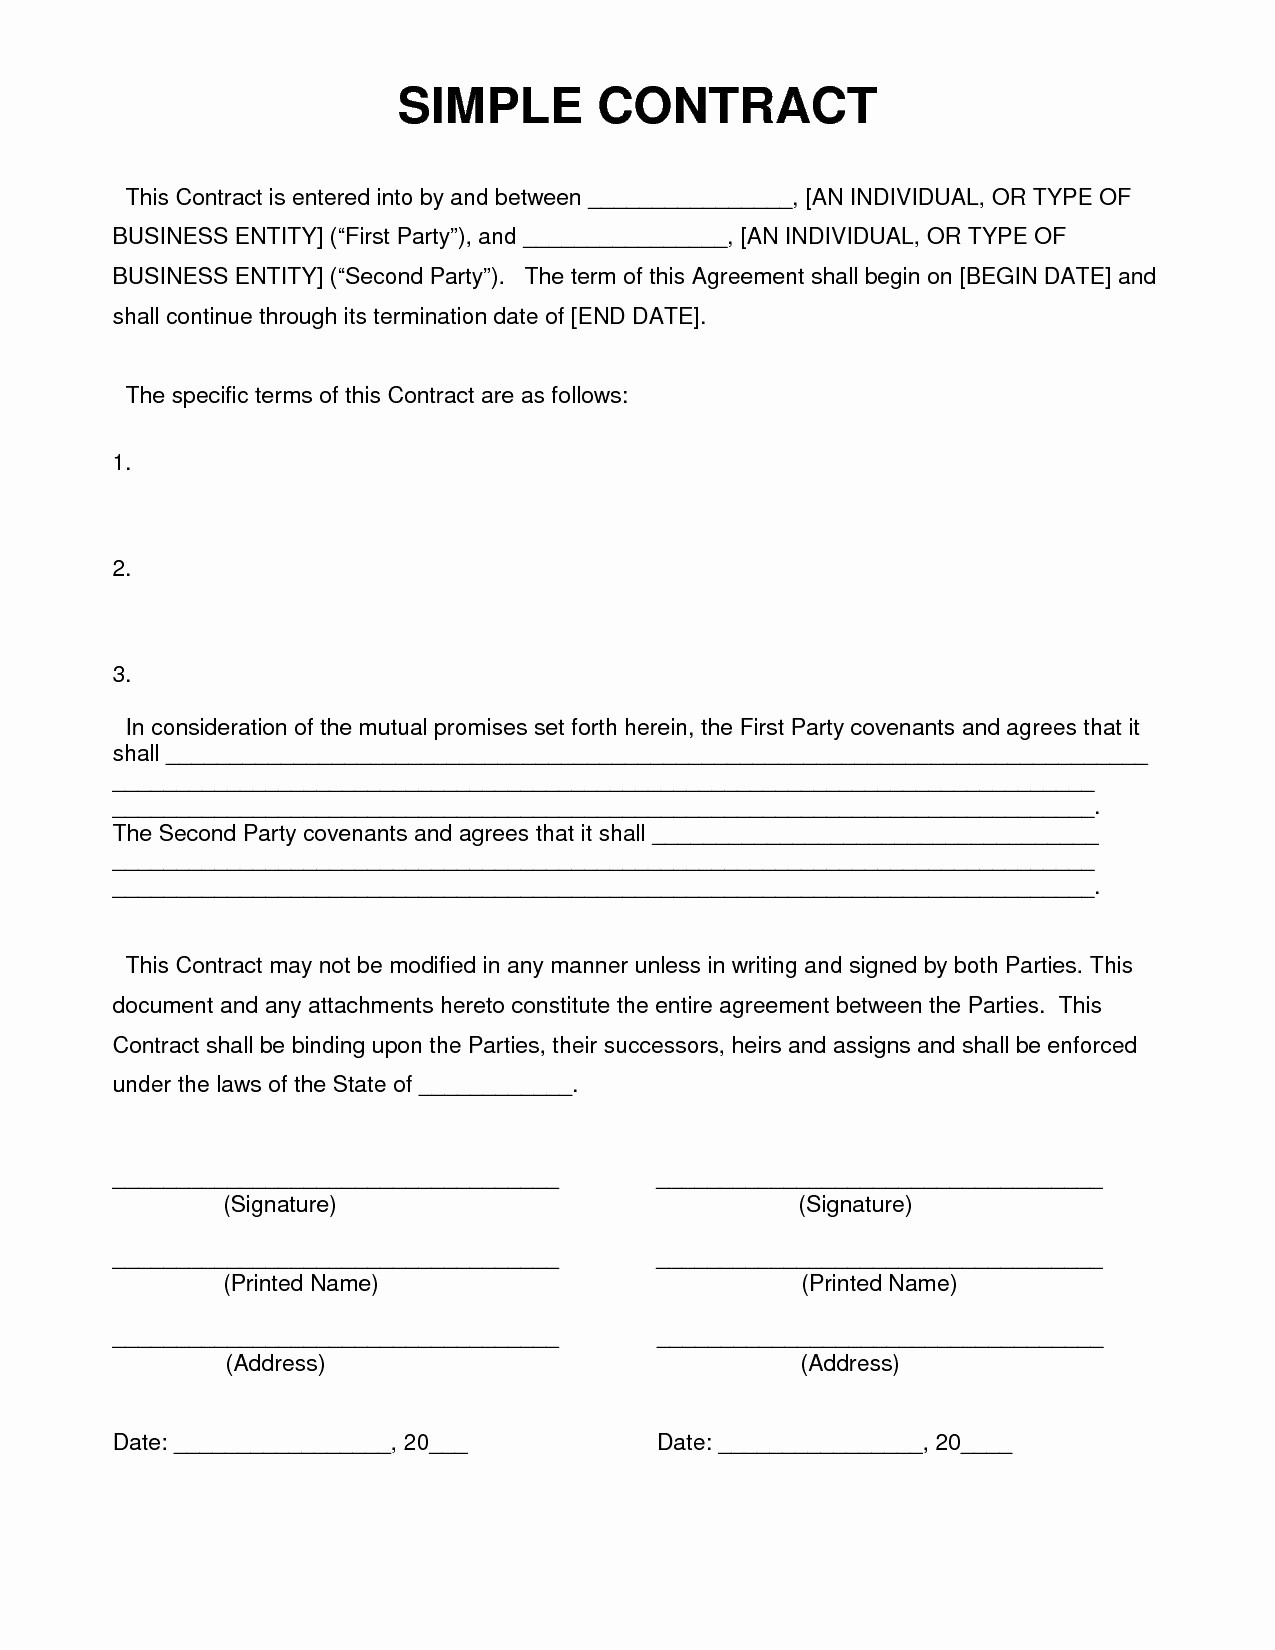 Personal Agreement Template 022 Template Ideas Personal Loan Form Agreement Between Friends